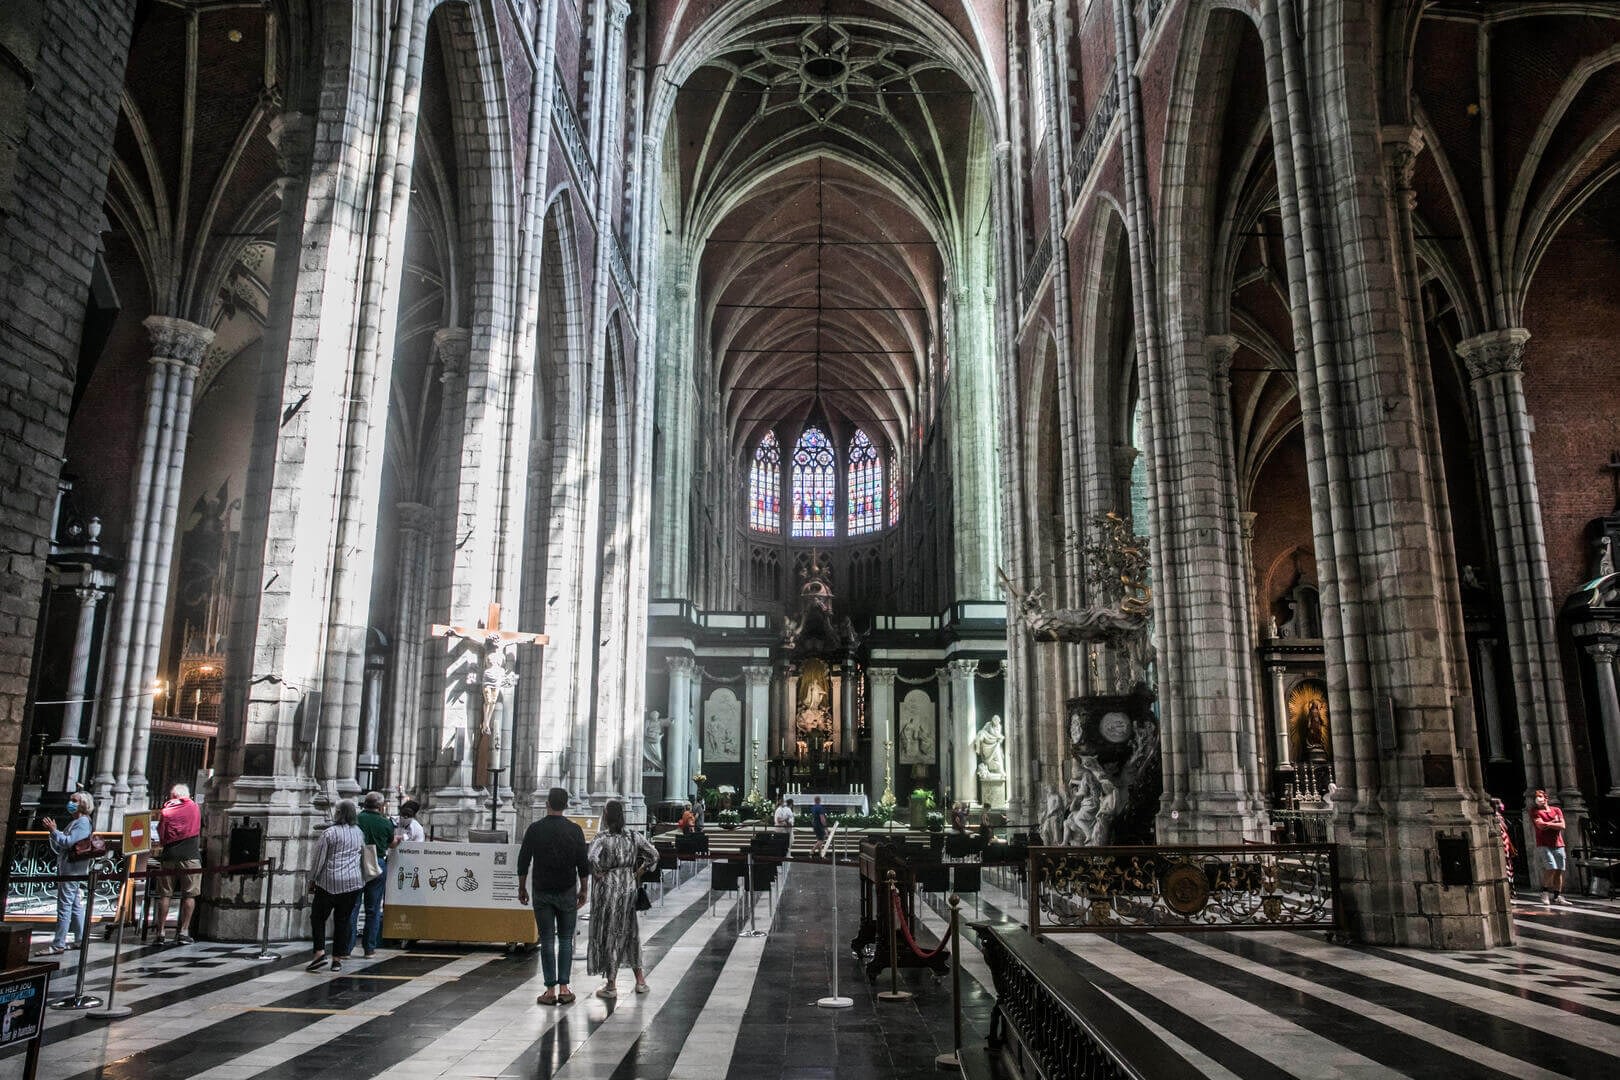 St. Bavo's Cathedral